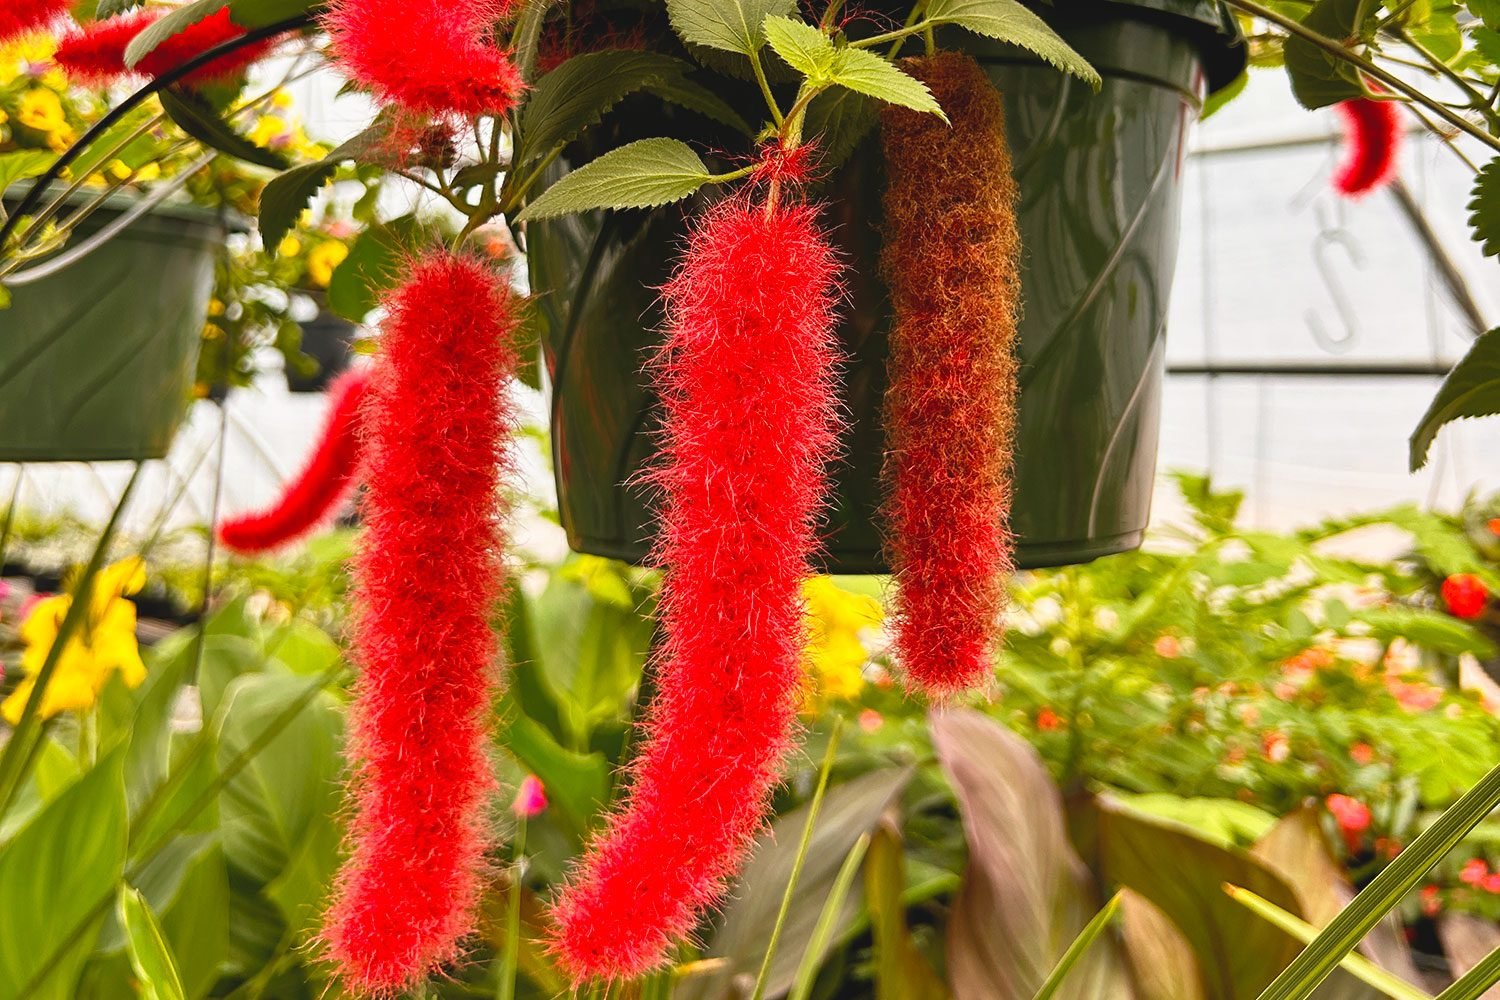 If You See This Red Fuzzy Plant, This Is What It Is